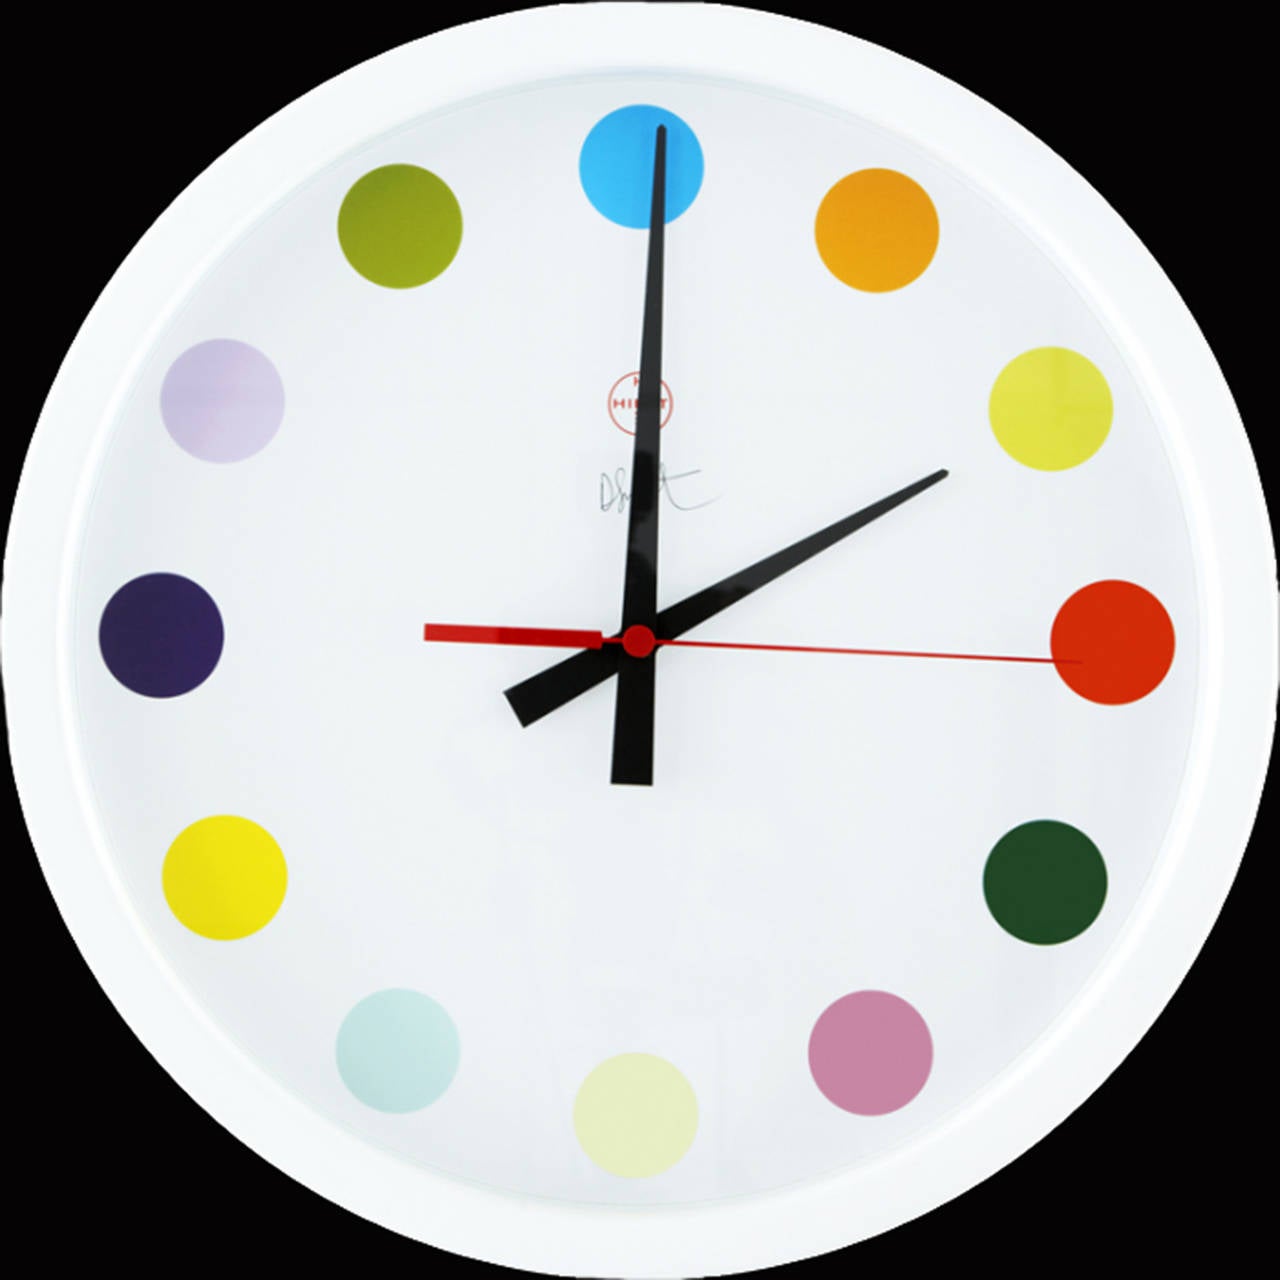 The spot clock uses Damien Hirst's popular spot paintings as its face, the front of which is printed with his signature and the Hirst/Hirst logo. The wall-mounted features a German quartz movement and is made of powder-coated metal.

Damien